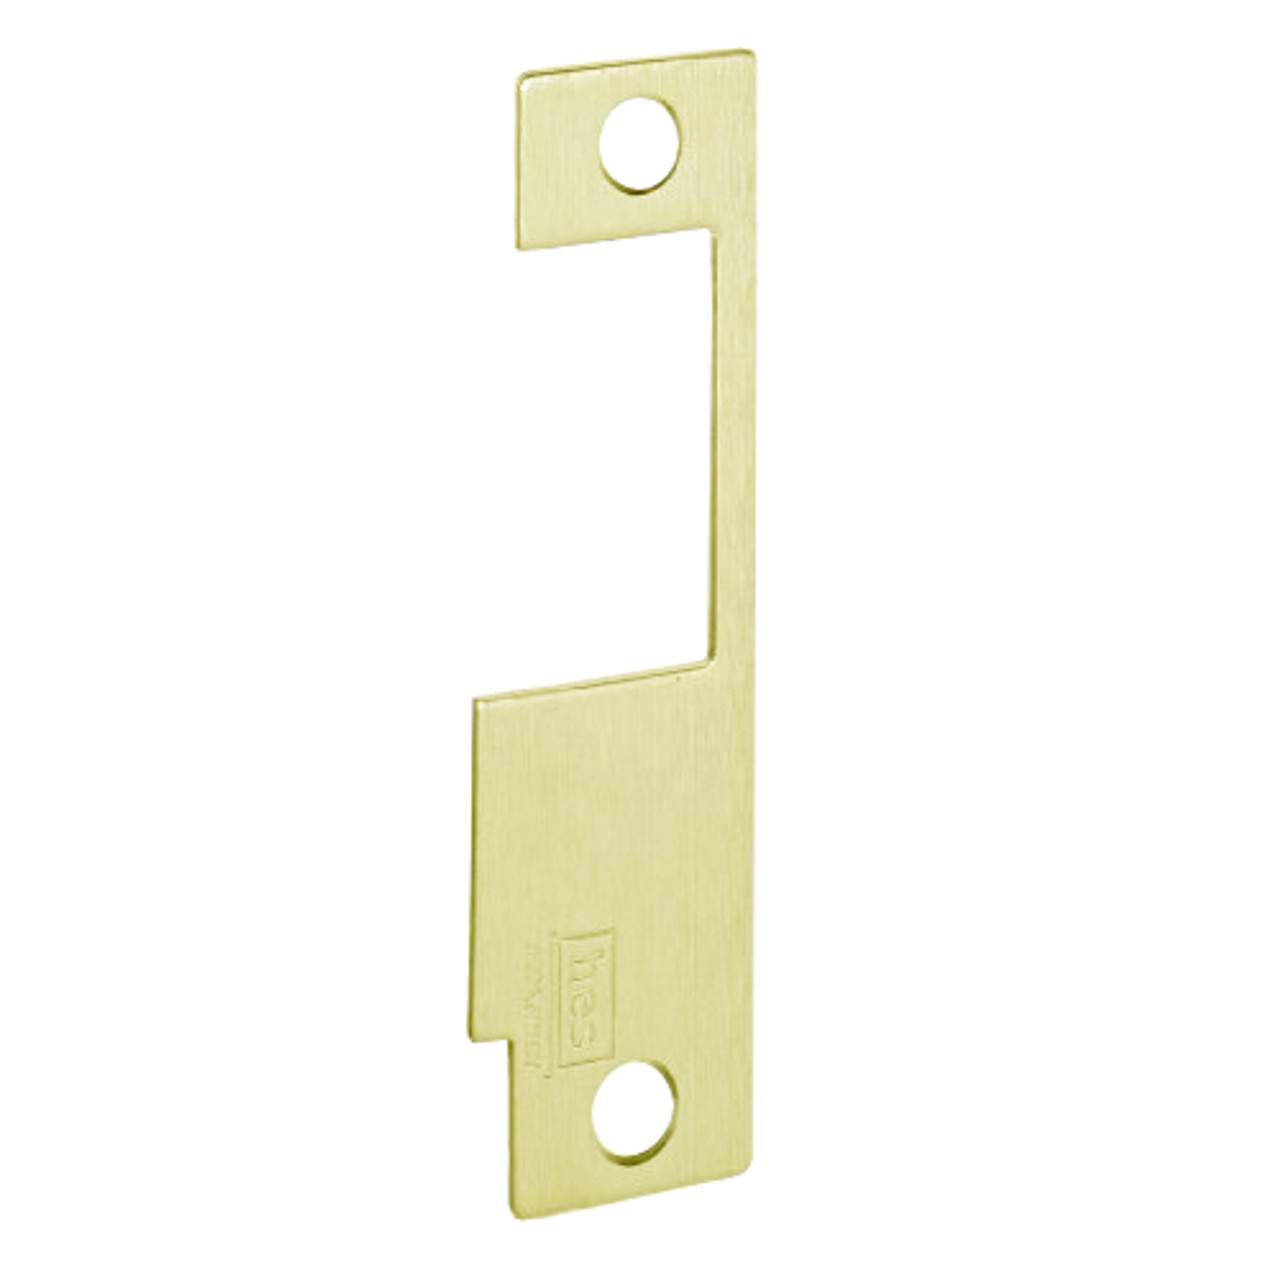 852L-605 Hes 4-7/8" x 1-1/4" Faceplate in Bright Brass Finish